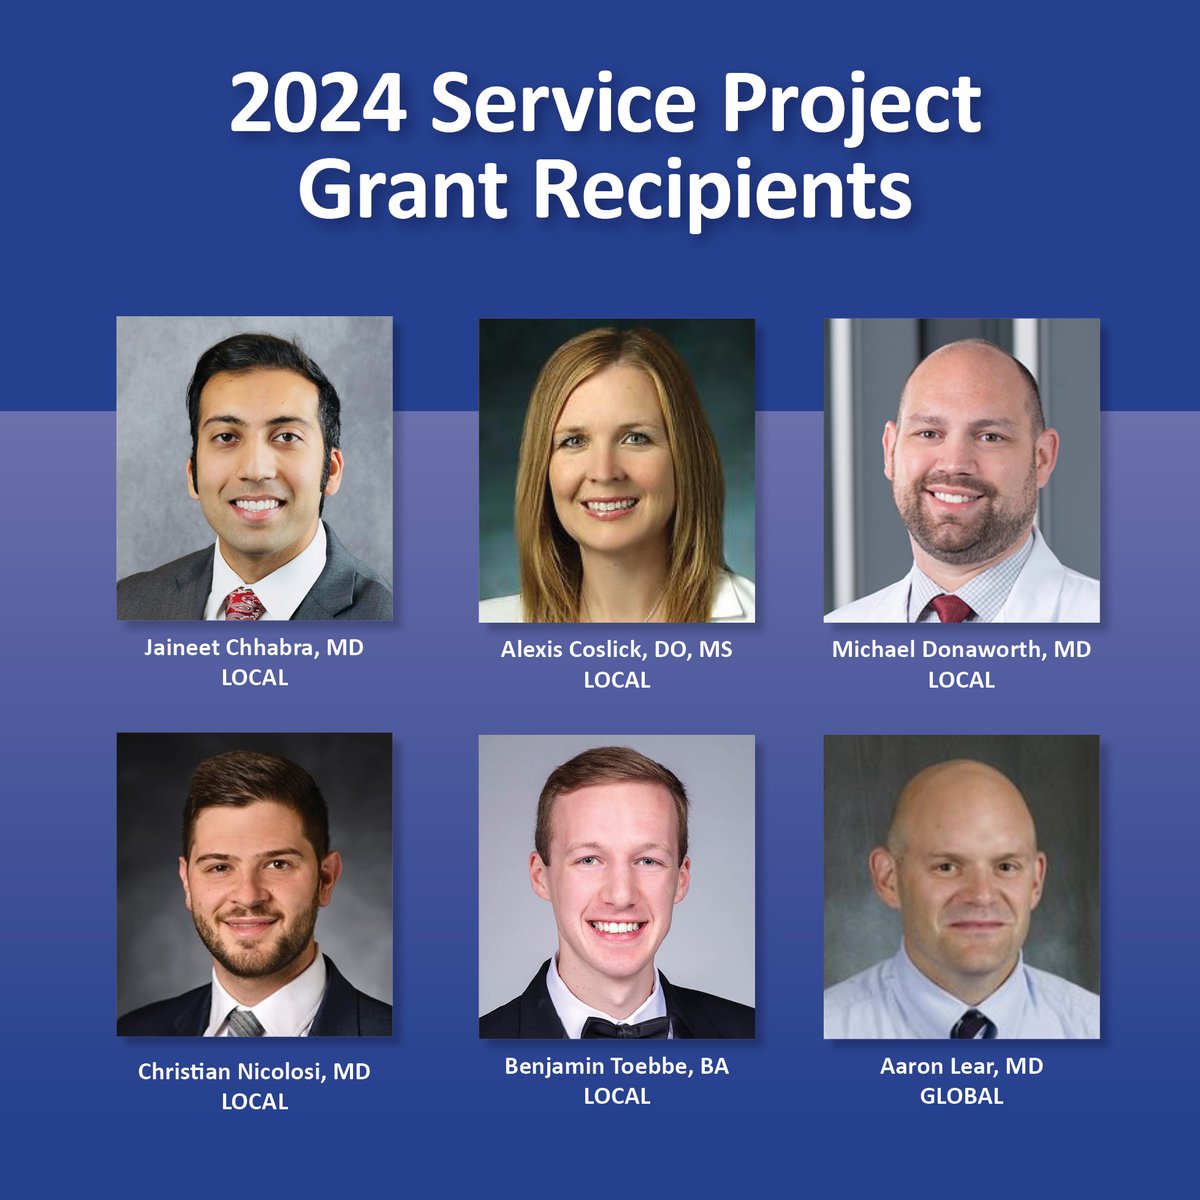 📢 AMSSM congratulates the following recipients of the 2024 Local and Global Humanitarian Service Project Grants! 👏👏 Look for more information about each one of these impactful service projects later this year.